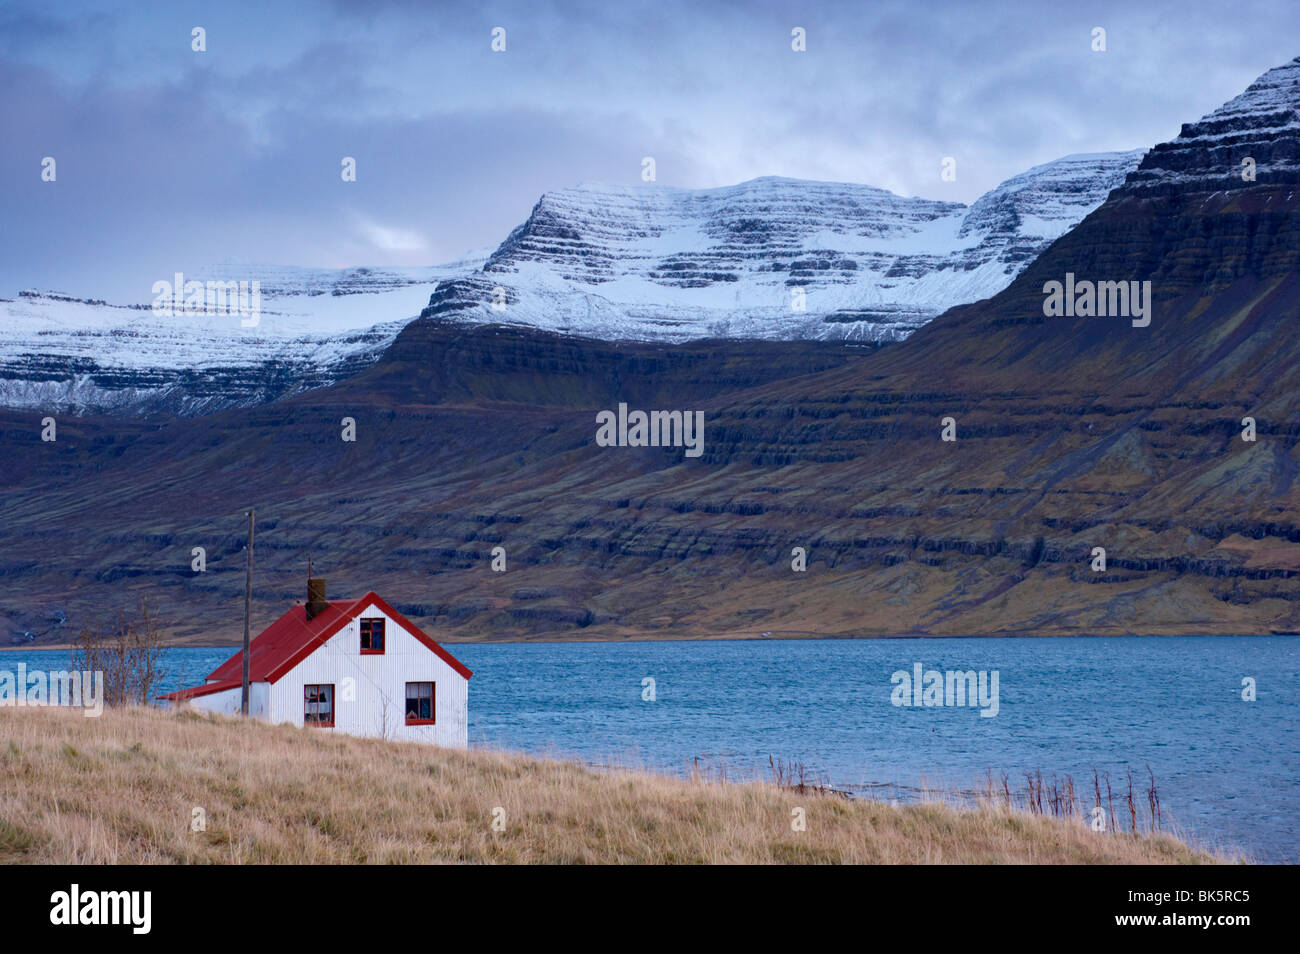 Red-roofed house and snow-capped mountains in Reydarfjordur fjord, East Fjords, Iceland, Polar Regions Stock Photo